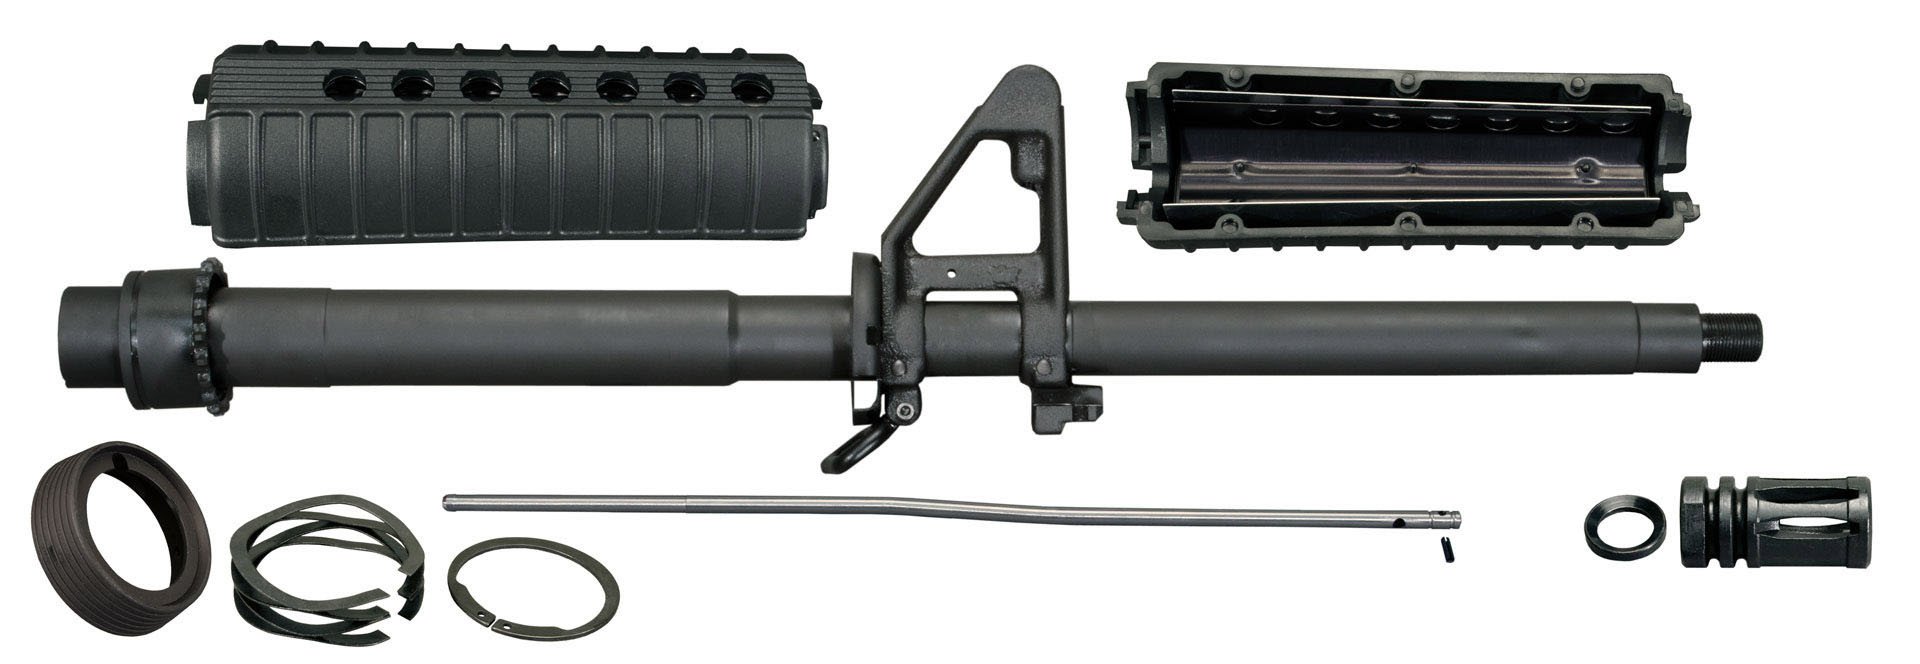 Windham Weaponry 16in Heavy Barrel Kit for AR15 / M16